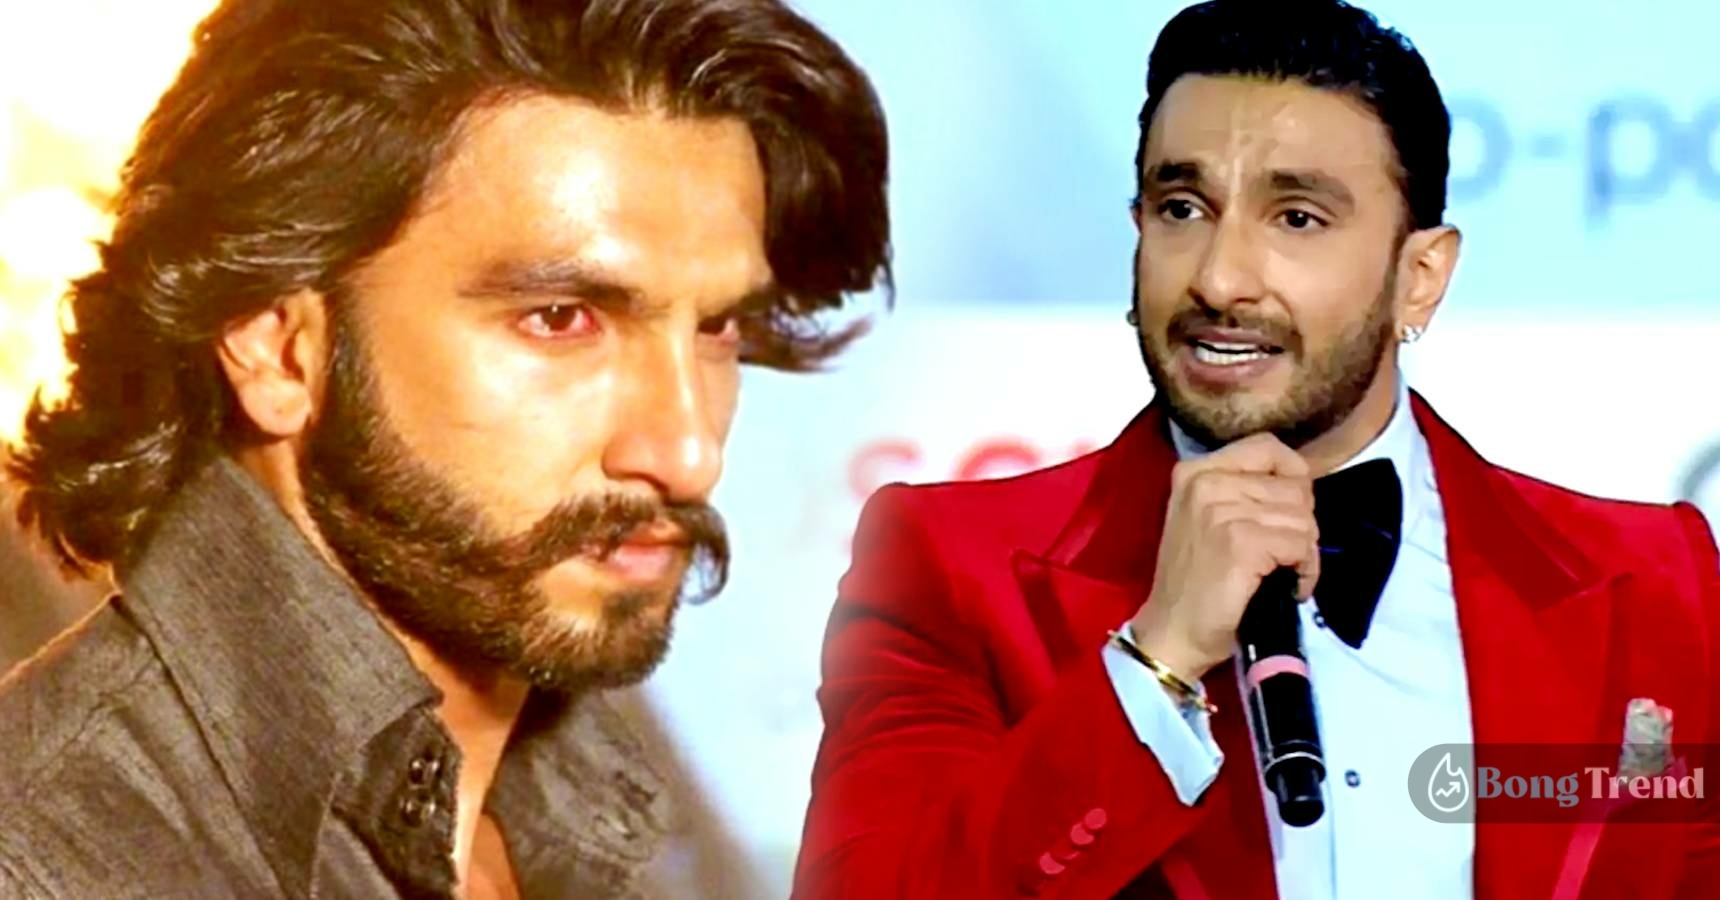 Bollywood actor Ranveer Singh reveals one producer unleashed dog on him to have fun